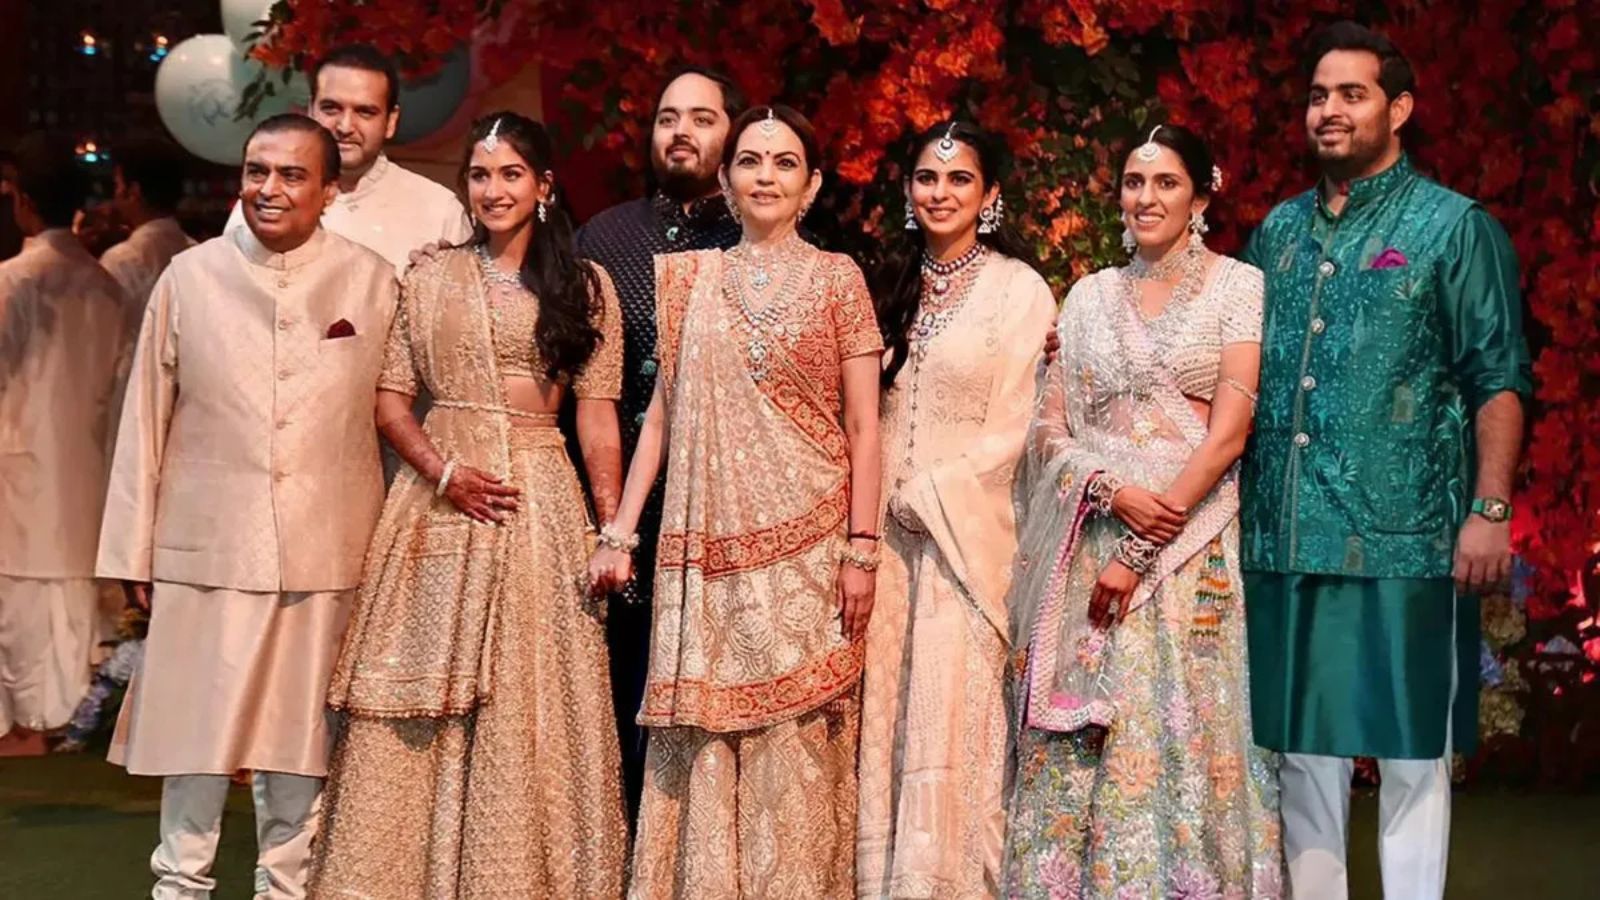 Ahead of the Anant-Radhika nuptials, here are the 10 most expensive Indian weddings of all time